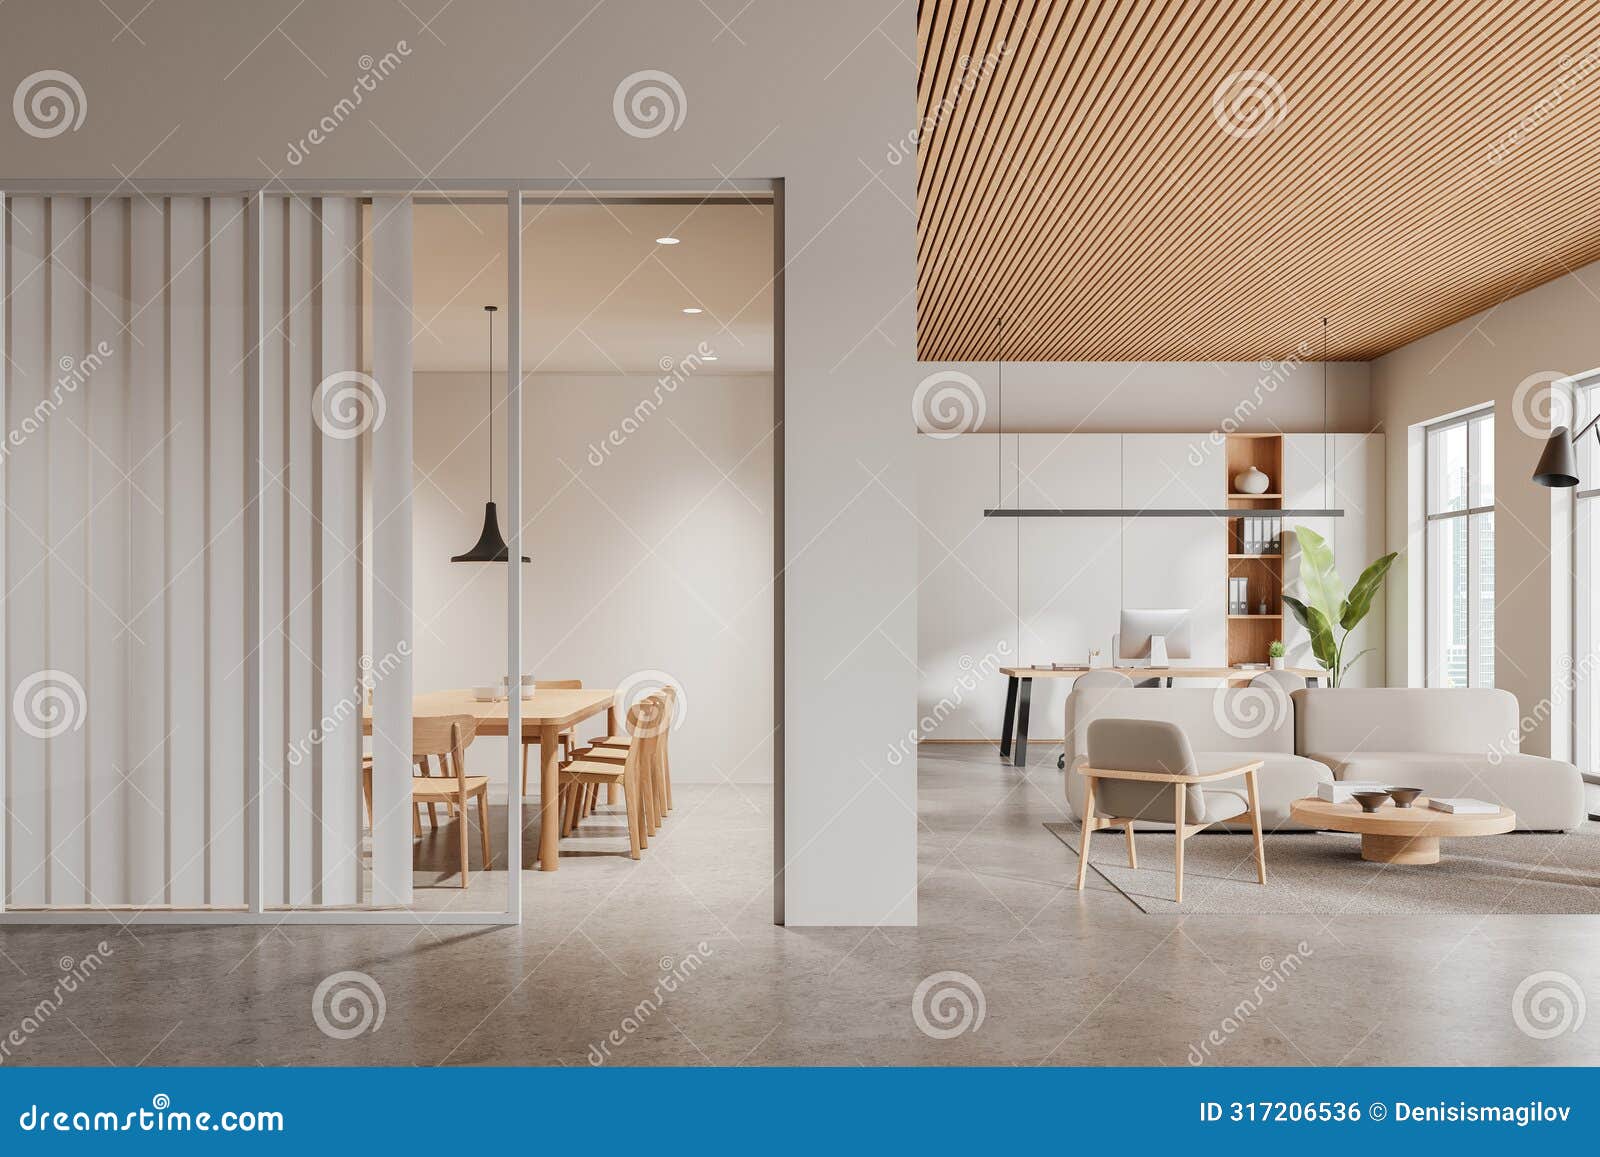 a spacious modern office interior with wooden furniture, clear glass partitions, and a light color scheme, concept of a